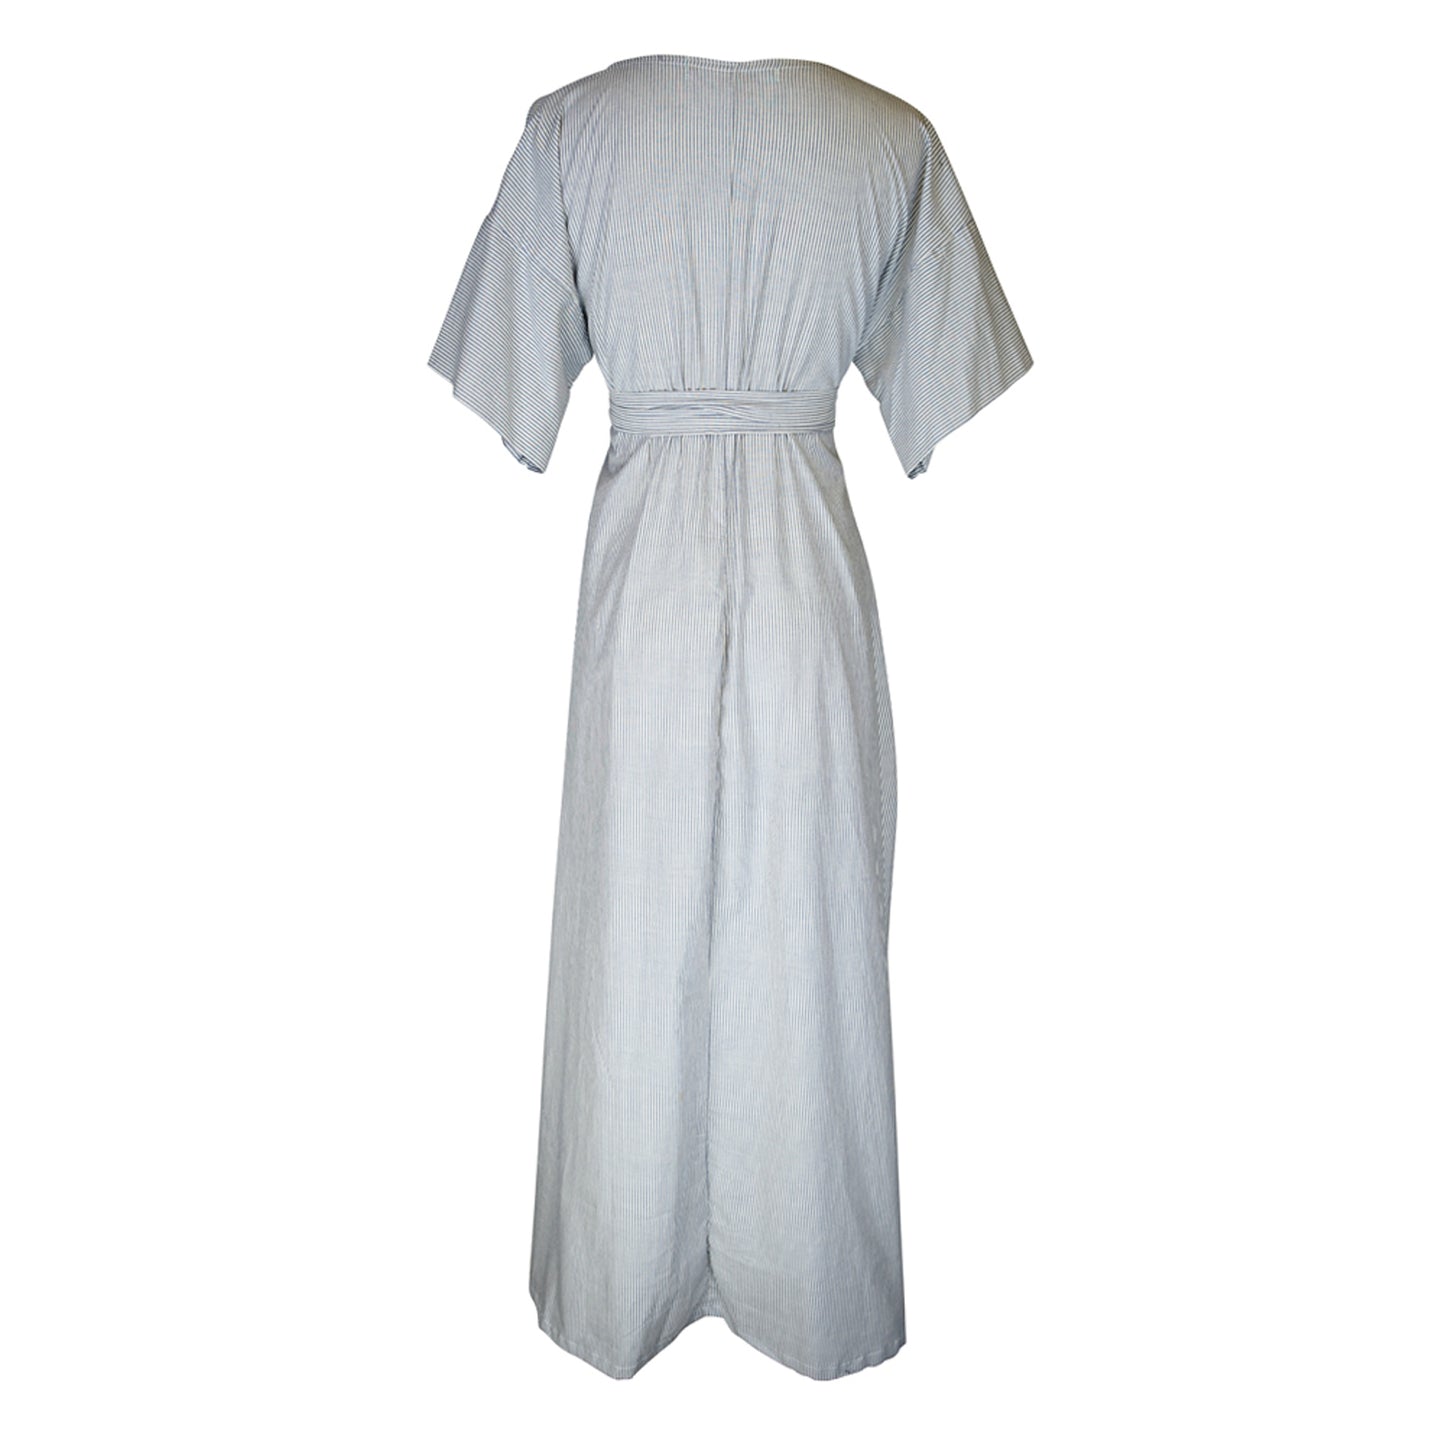 White and blue vertical pinstripe a-line midi-maxi dress featuring v-neck, short sleeves, and built-in sash ties for a cinched, wrap waist look. This dress falls at approximately lower calf or ankle. Nautical bohemian in style.